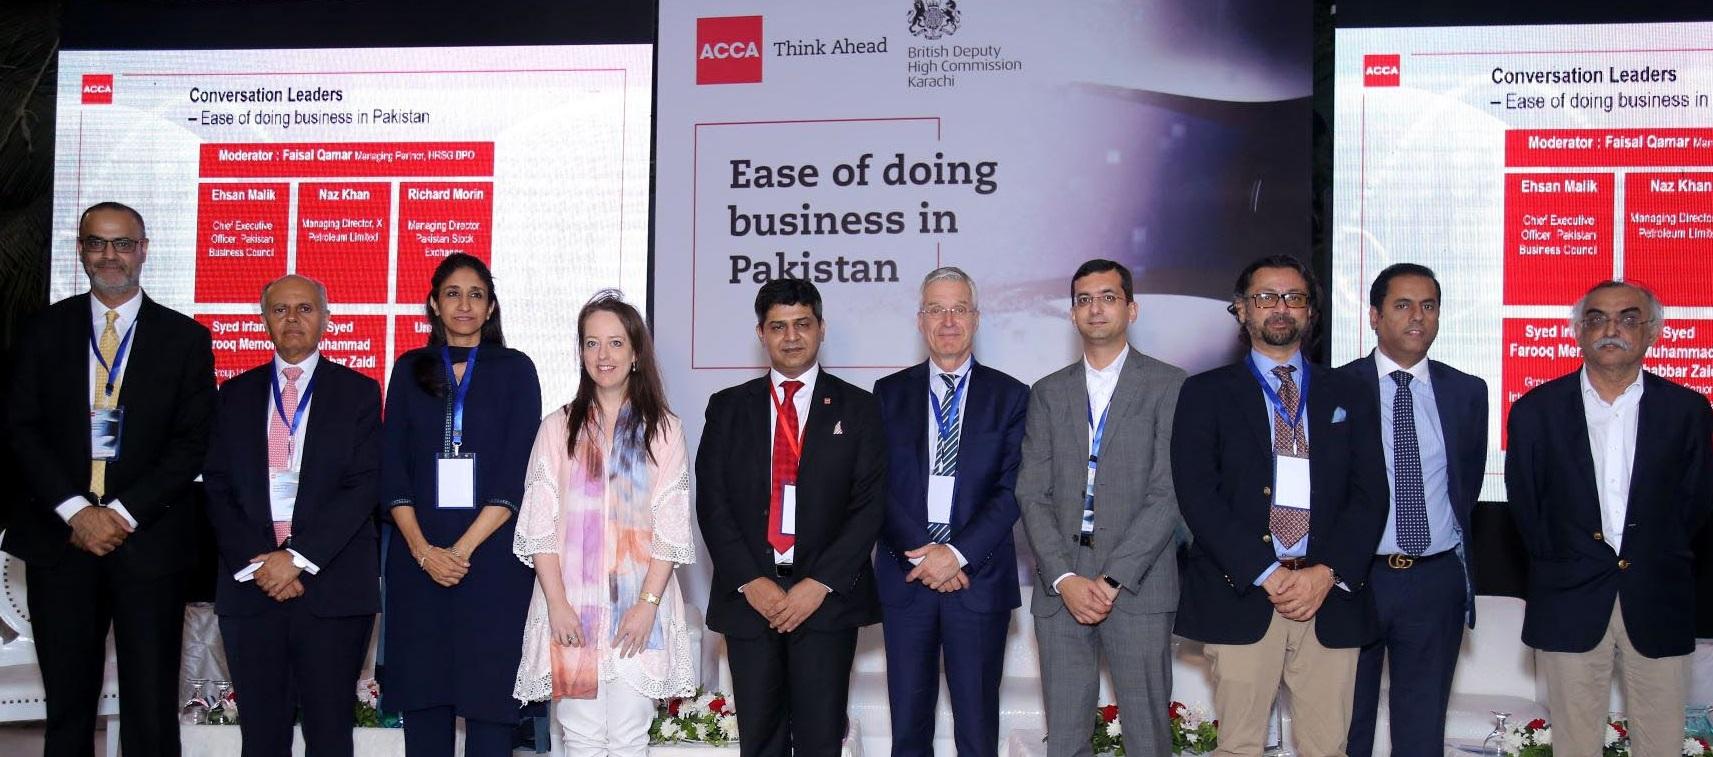 ACCA and British High Commission hold event on “Ease of Doing Business in Pakistan”